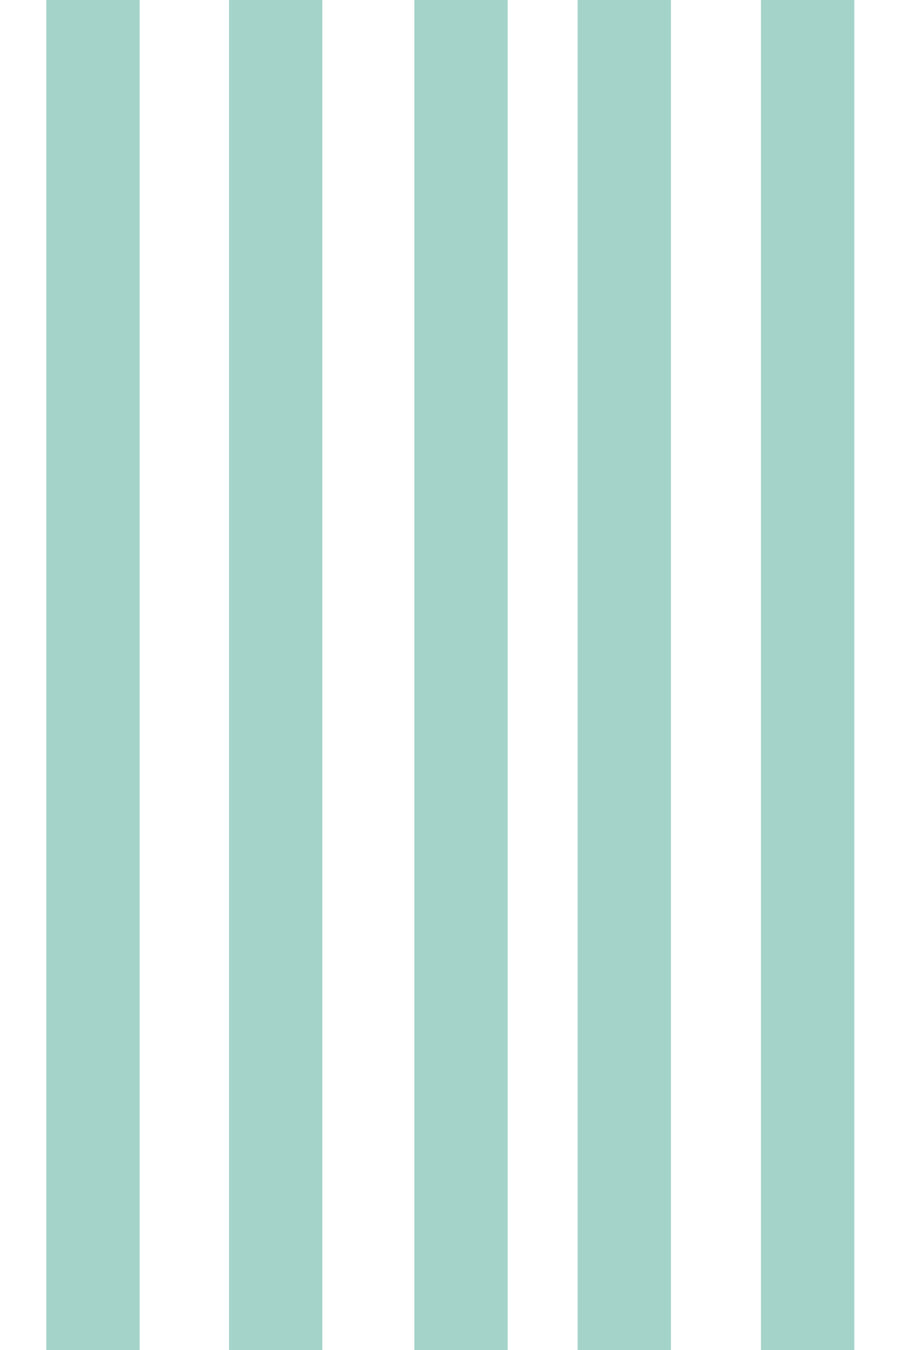 Woolf With Me Fitted Crib Sheet Stripes color_pale-turquoise